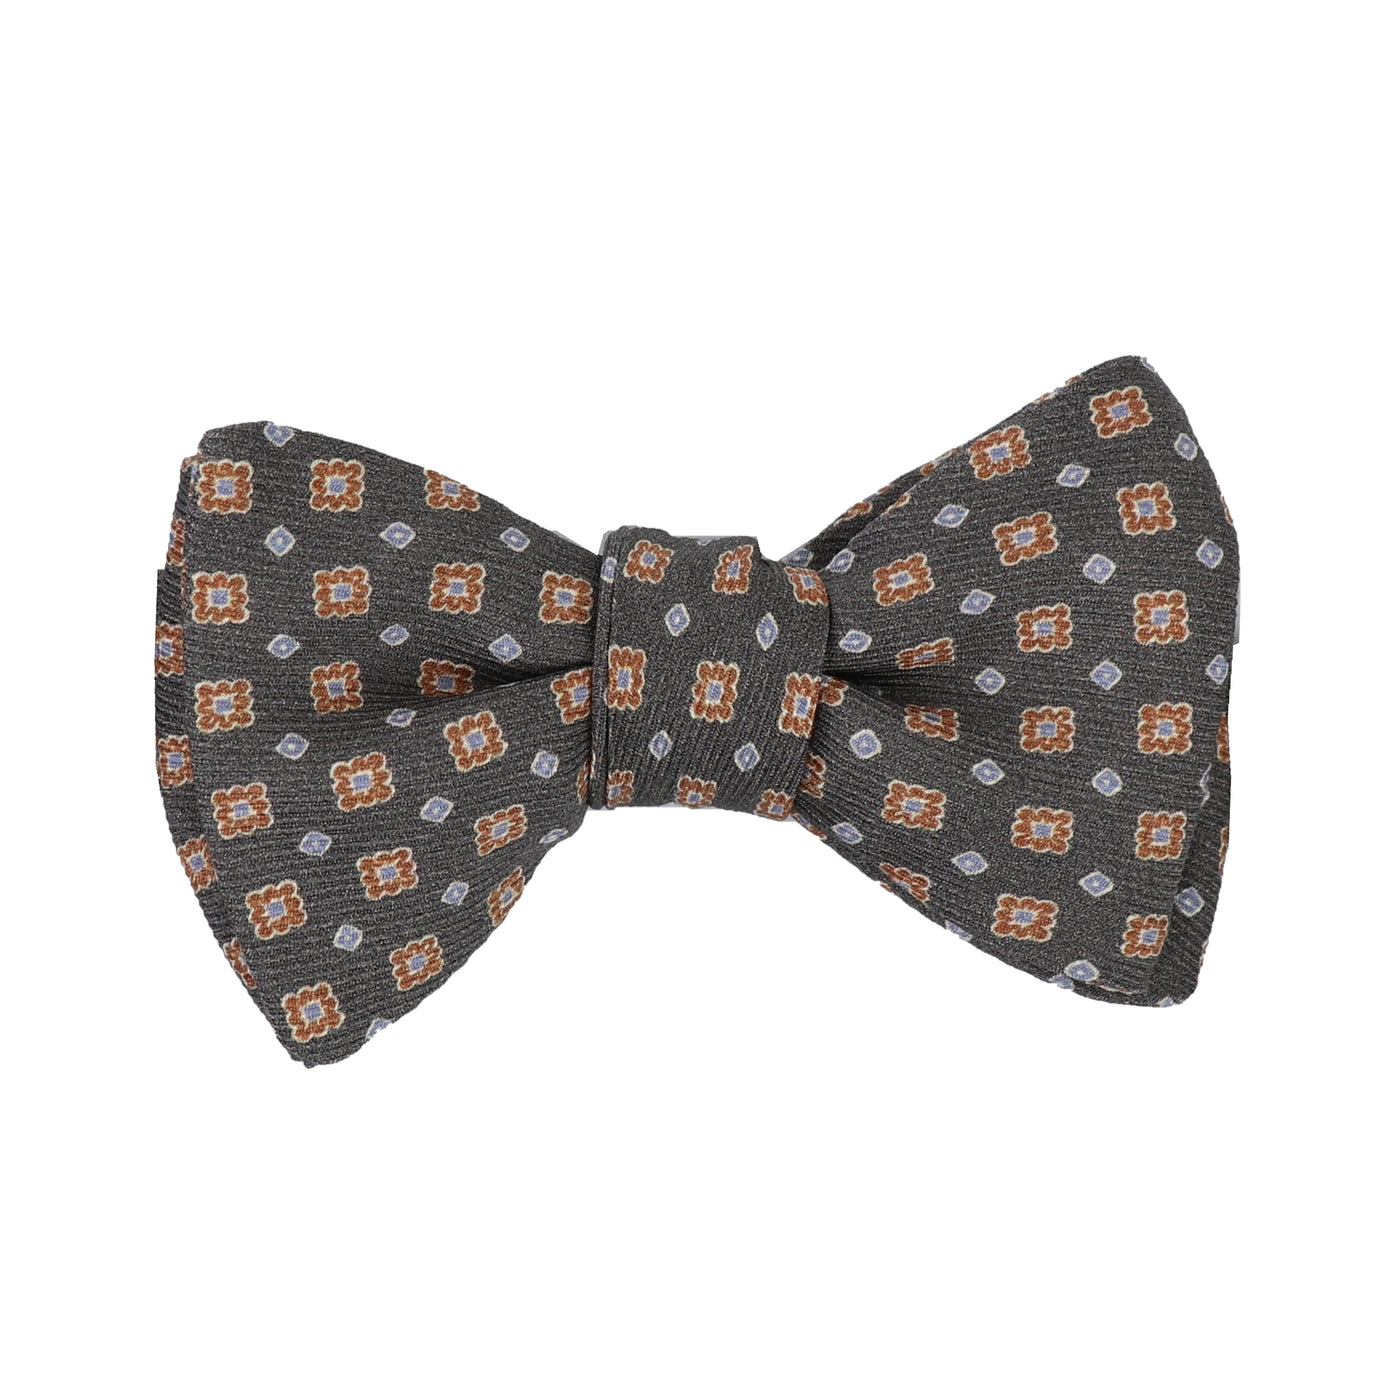 Floral Medallion Bow Tie in Grey & Tan